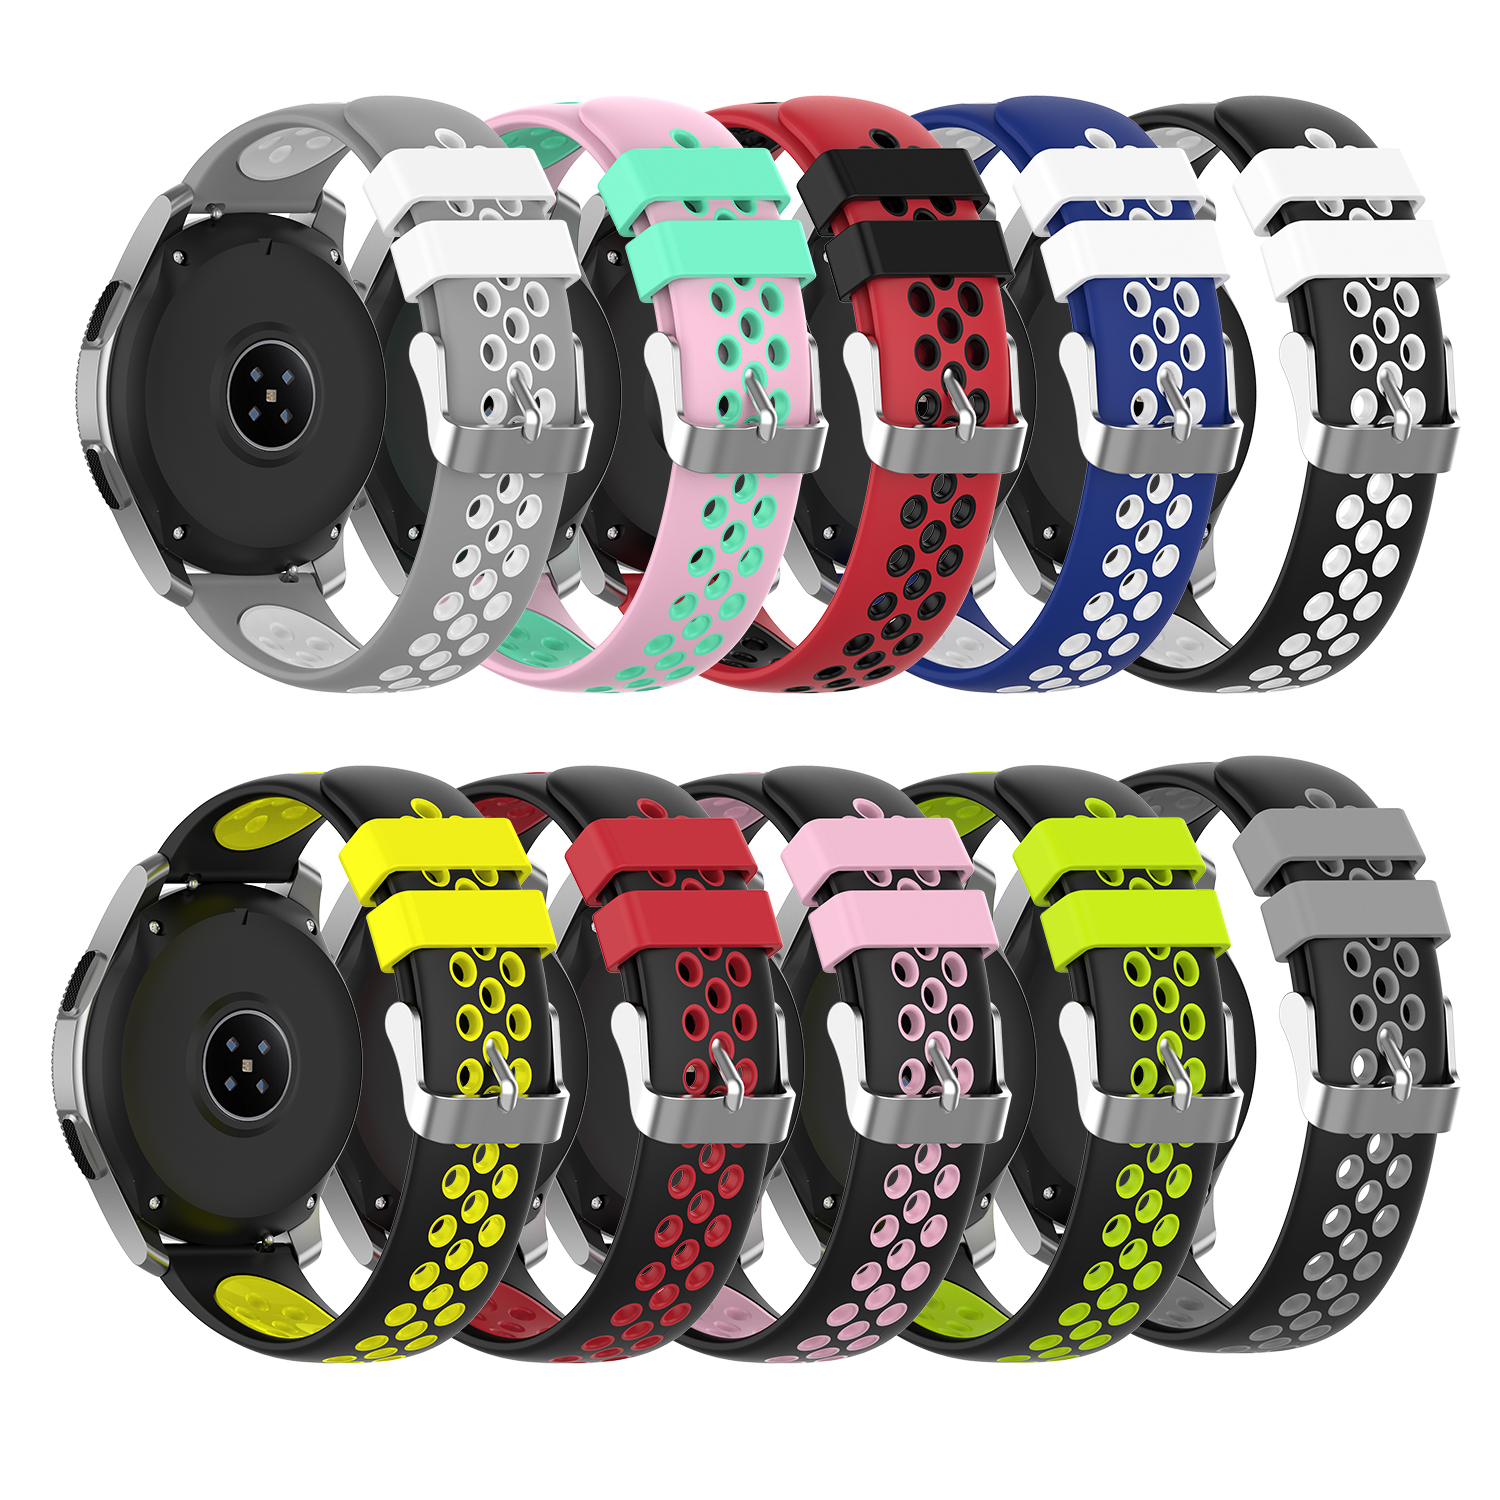 Bakeey-2022mm-Width-Universal-Sports-Dot-Pattern-Soft-Silicone-Watch-Band-Strap-Replacement-for-Sams-1737704-2